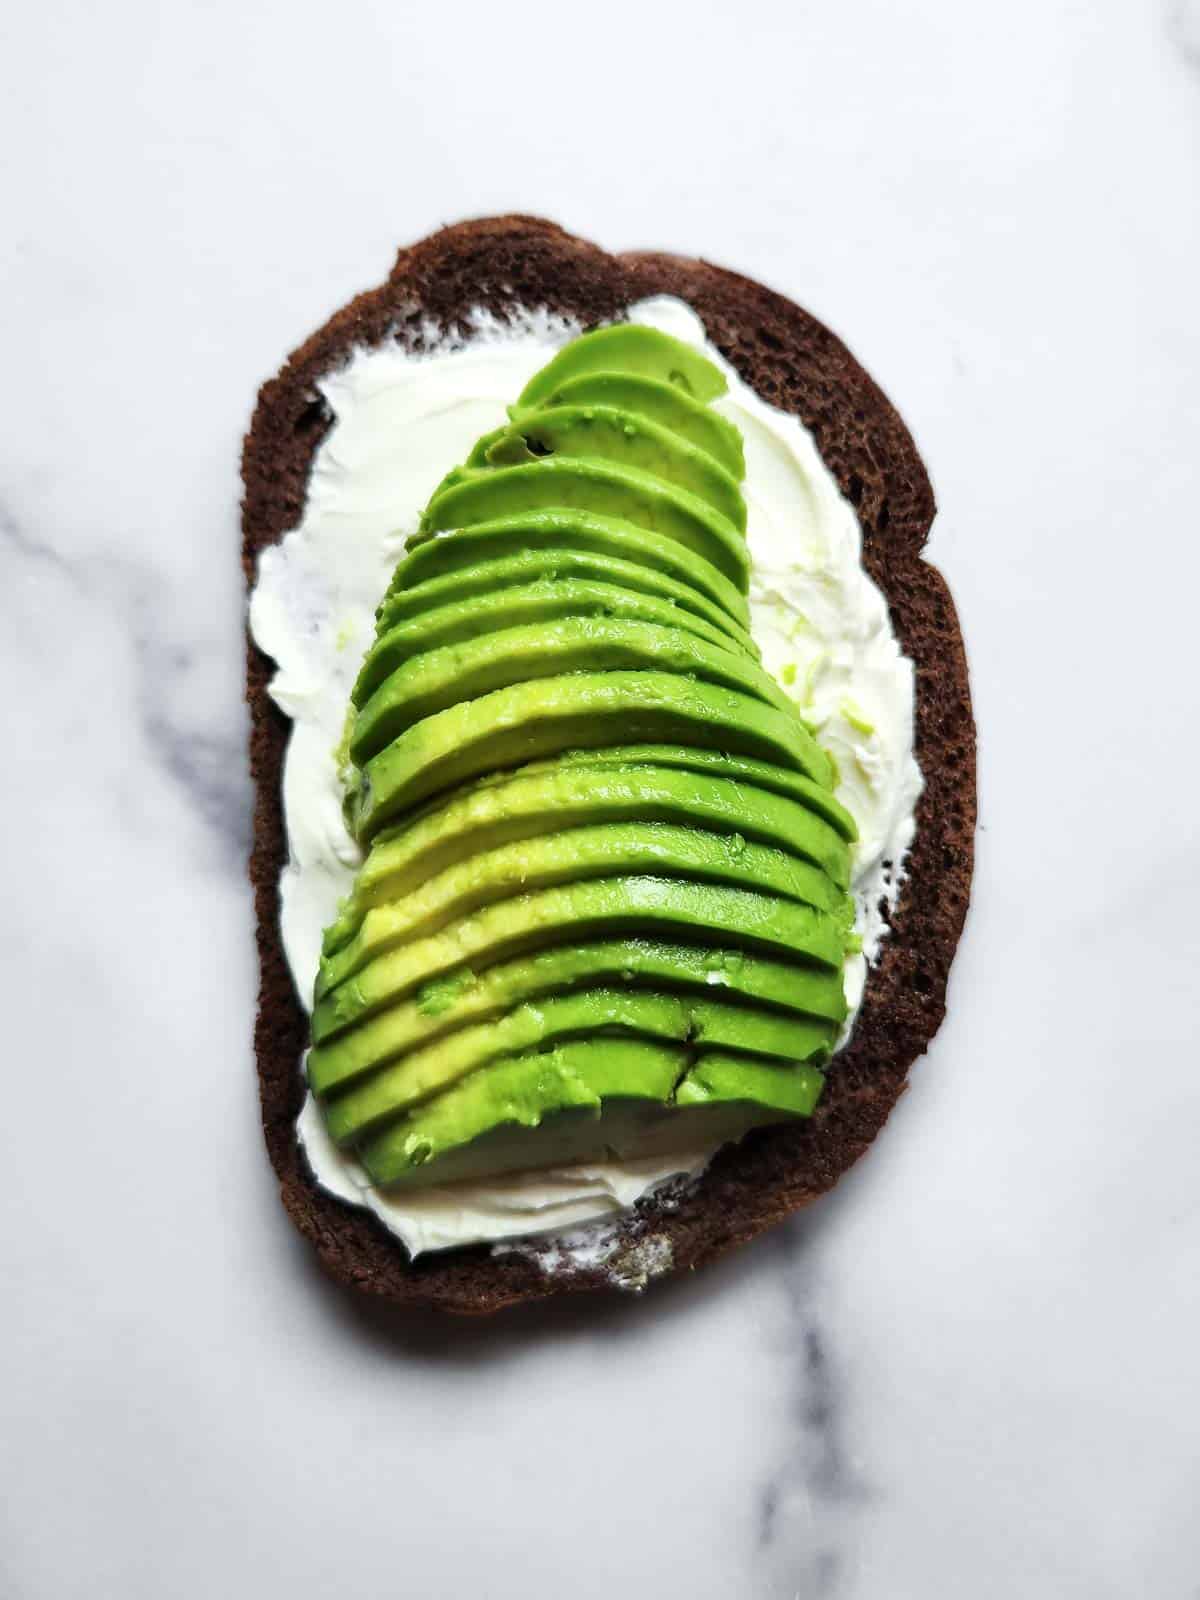 Pumpernickel bread with cream cheese and avocado on a white background.